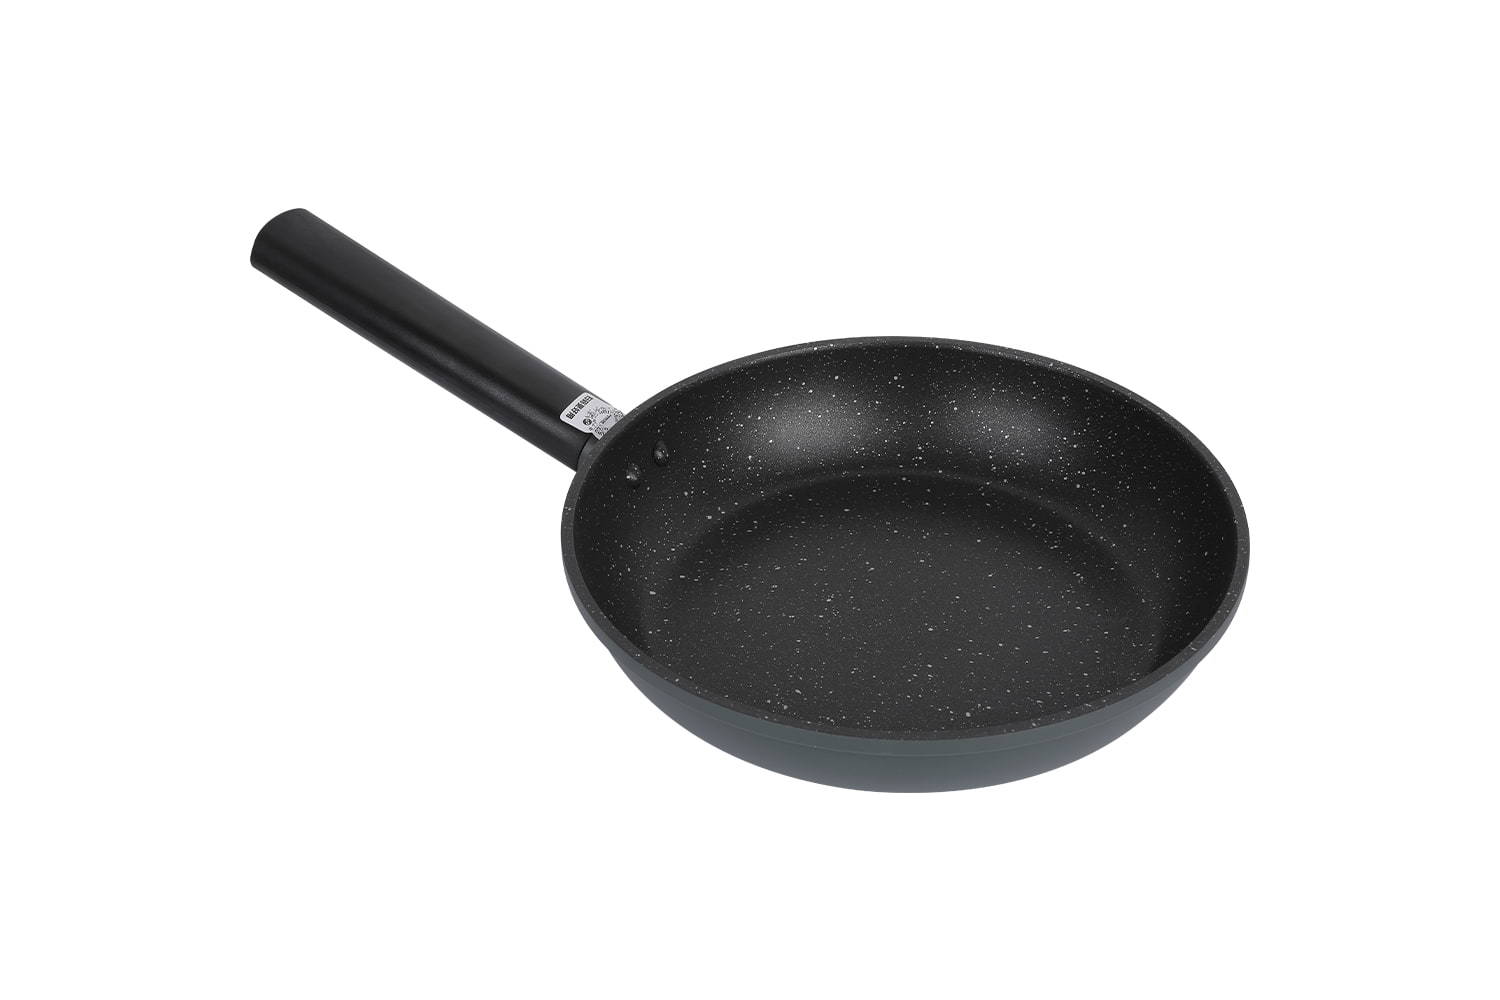 CF-JLW2463D Imitation die-casting frying pan-No glass lid, imitation die-cast medical stone non-stick 24 frying pan